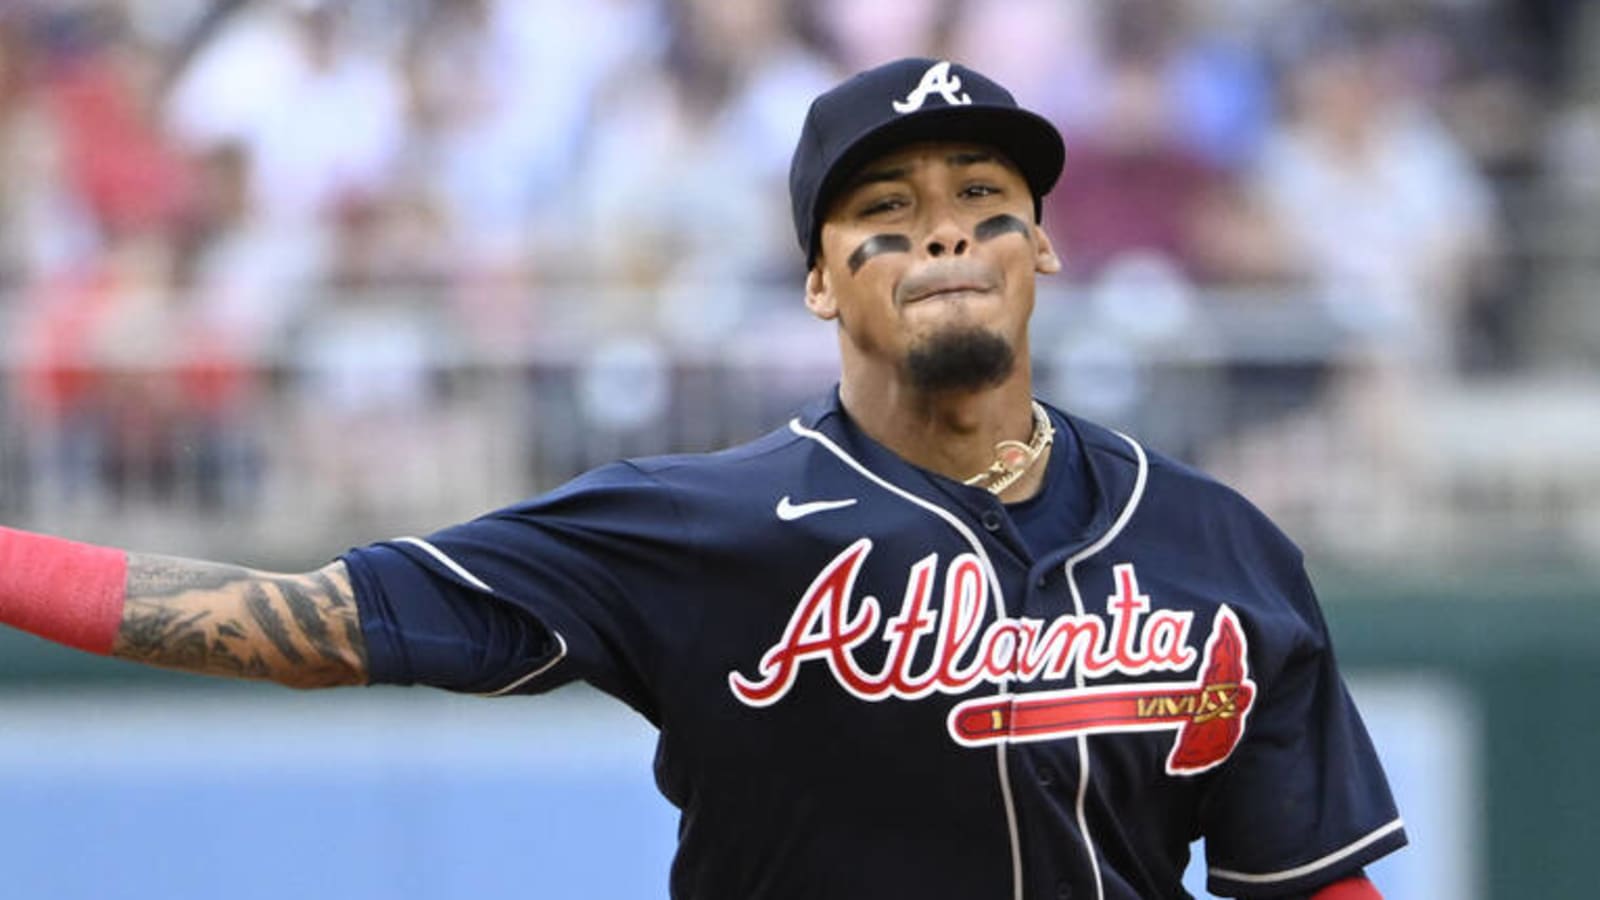 Braves shortstops easing concerns early on